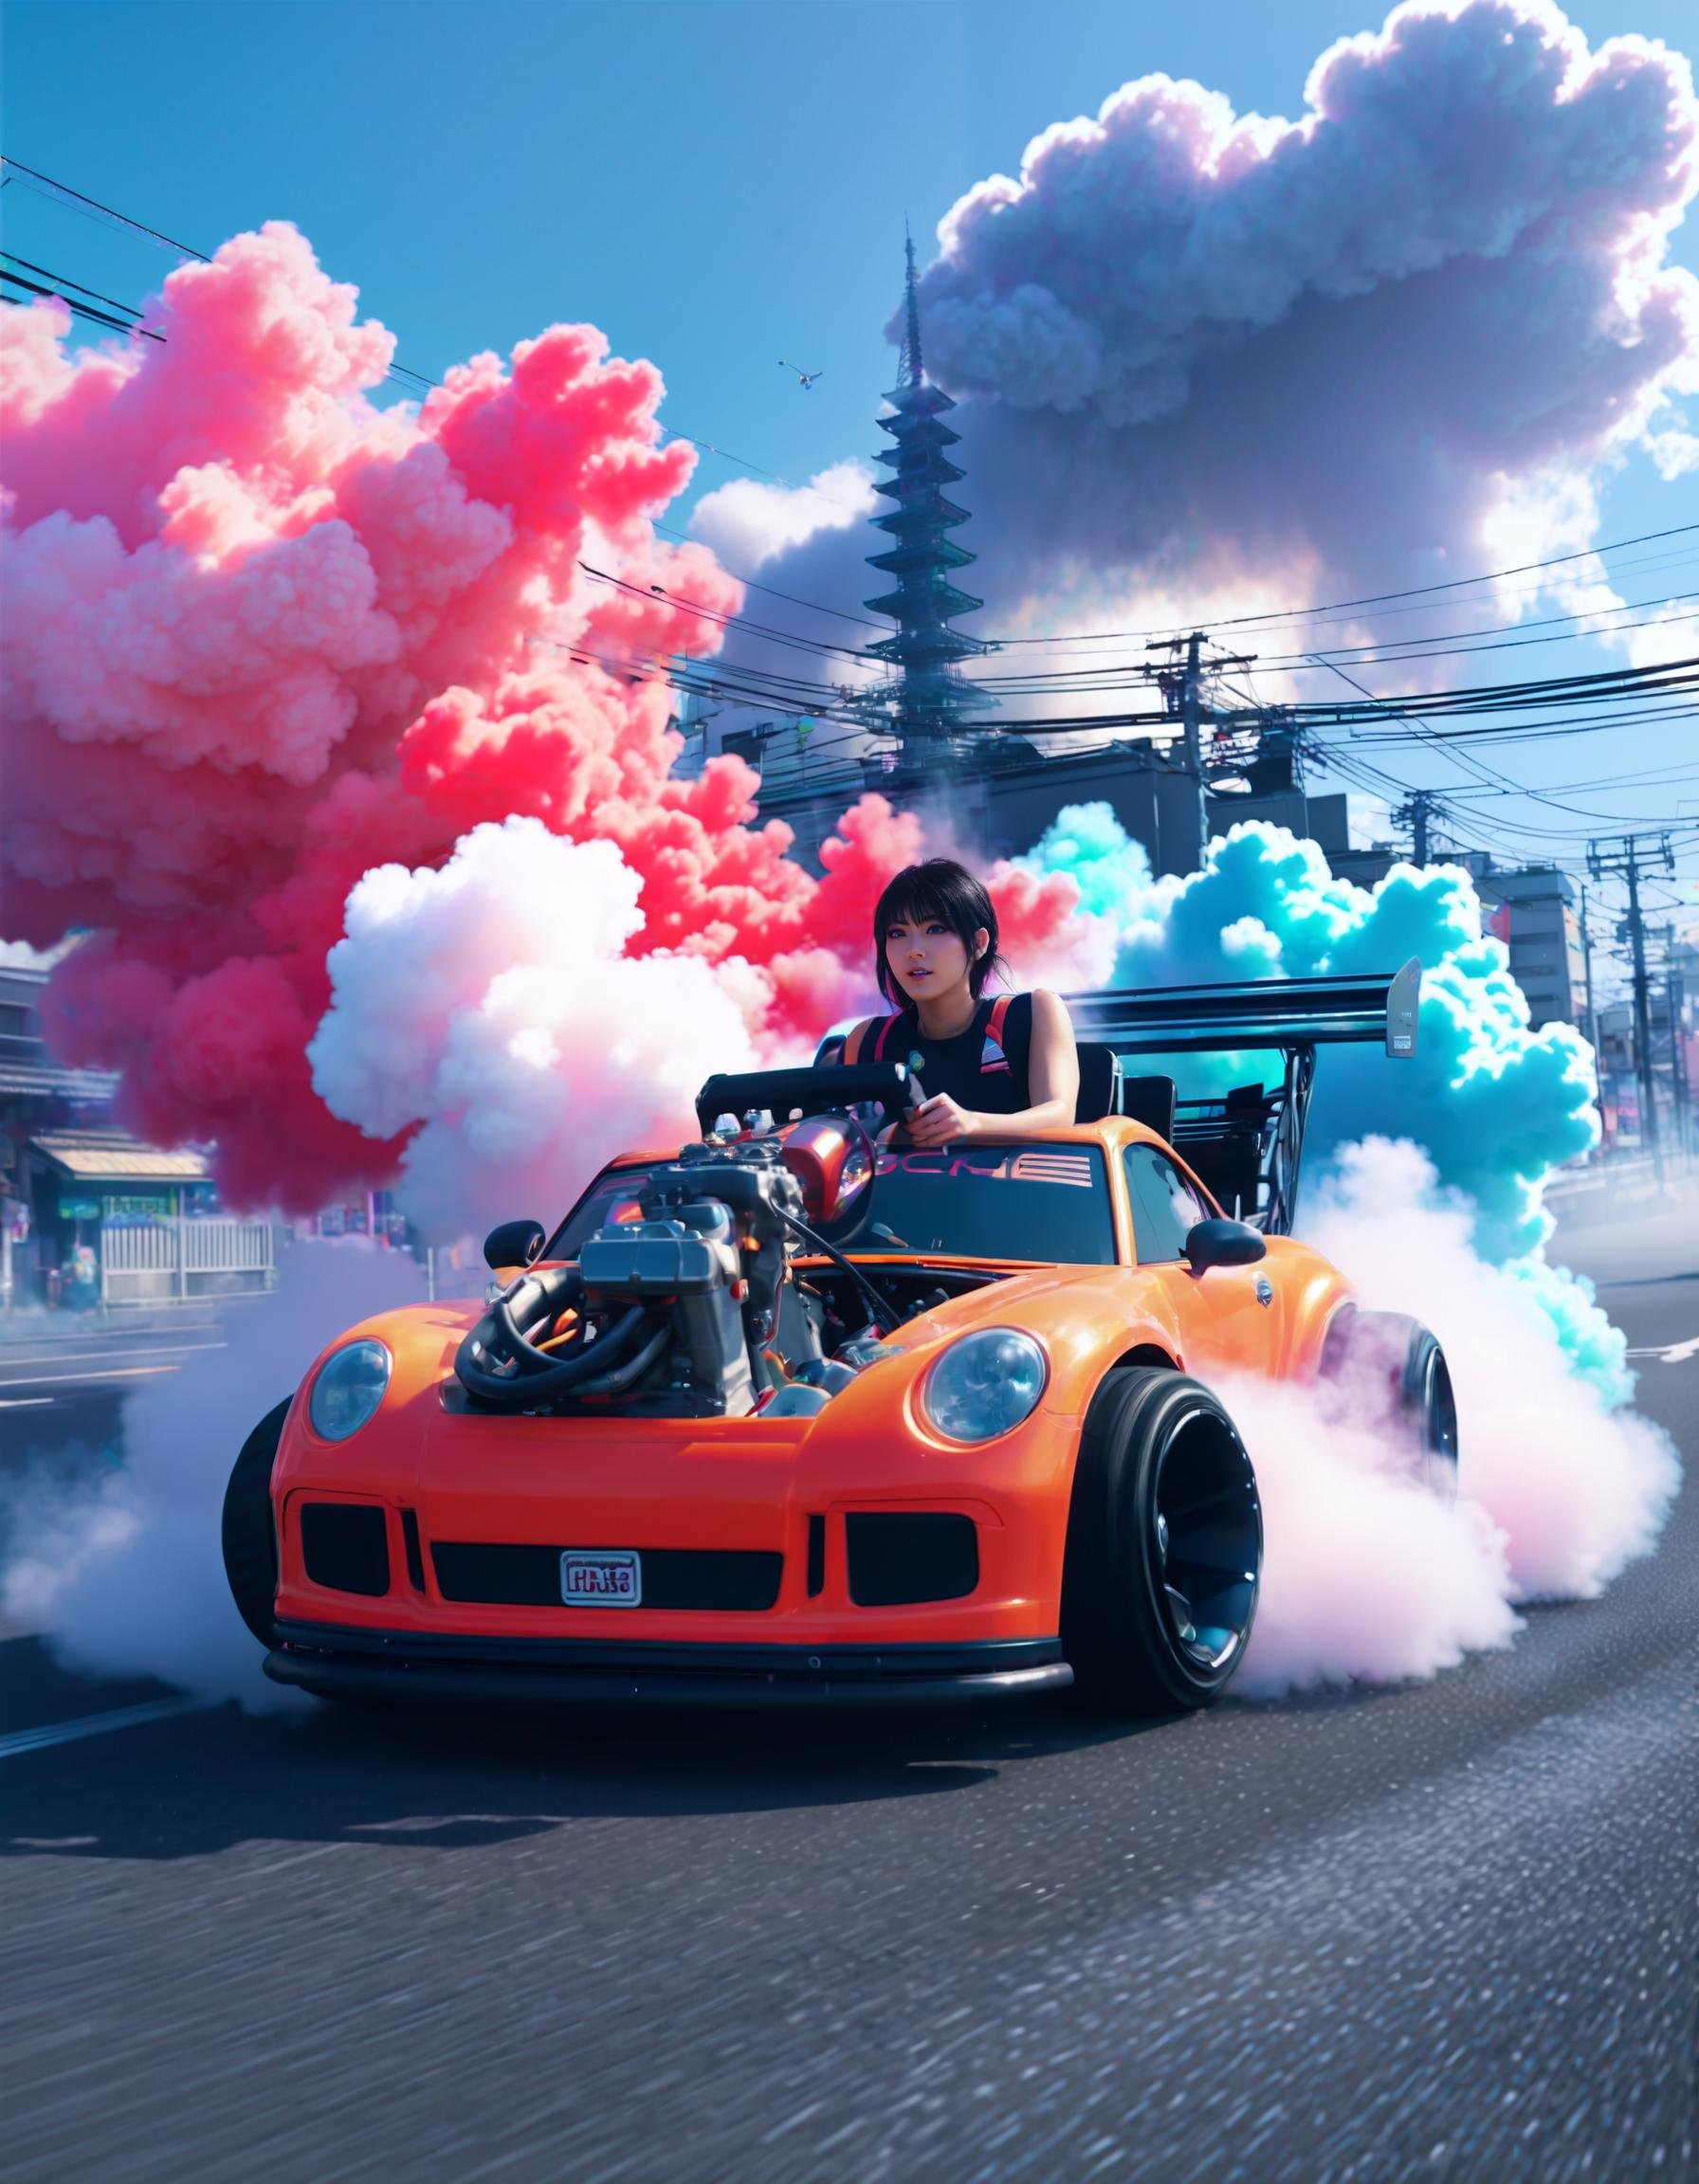 anime artwork Nobara Kugisaki driving a pturbo, (tokyo:1.1) city, fog, smoke, high speed, neon lights,explosion,front view, focus on the car, animation, rainbow, wearing a latex racesuit, candy cotton clouds, in wonderland . anime style, key visual, vibrant, studio anime, highly detailed